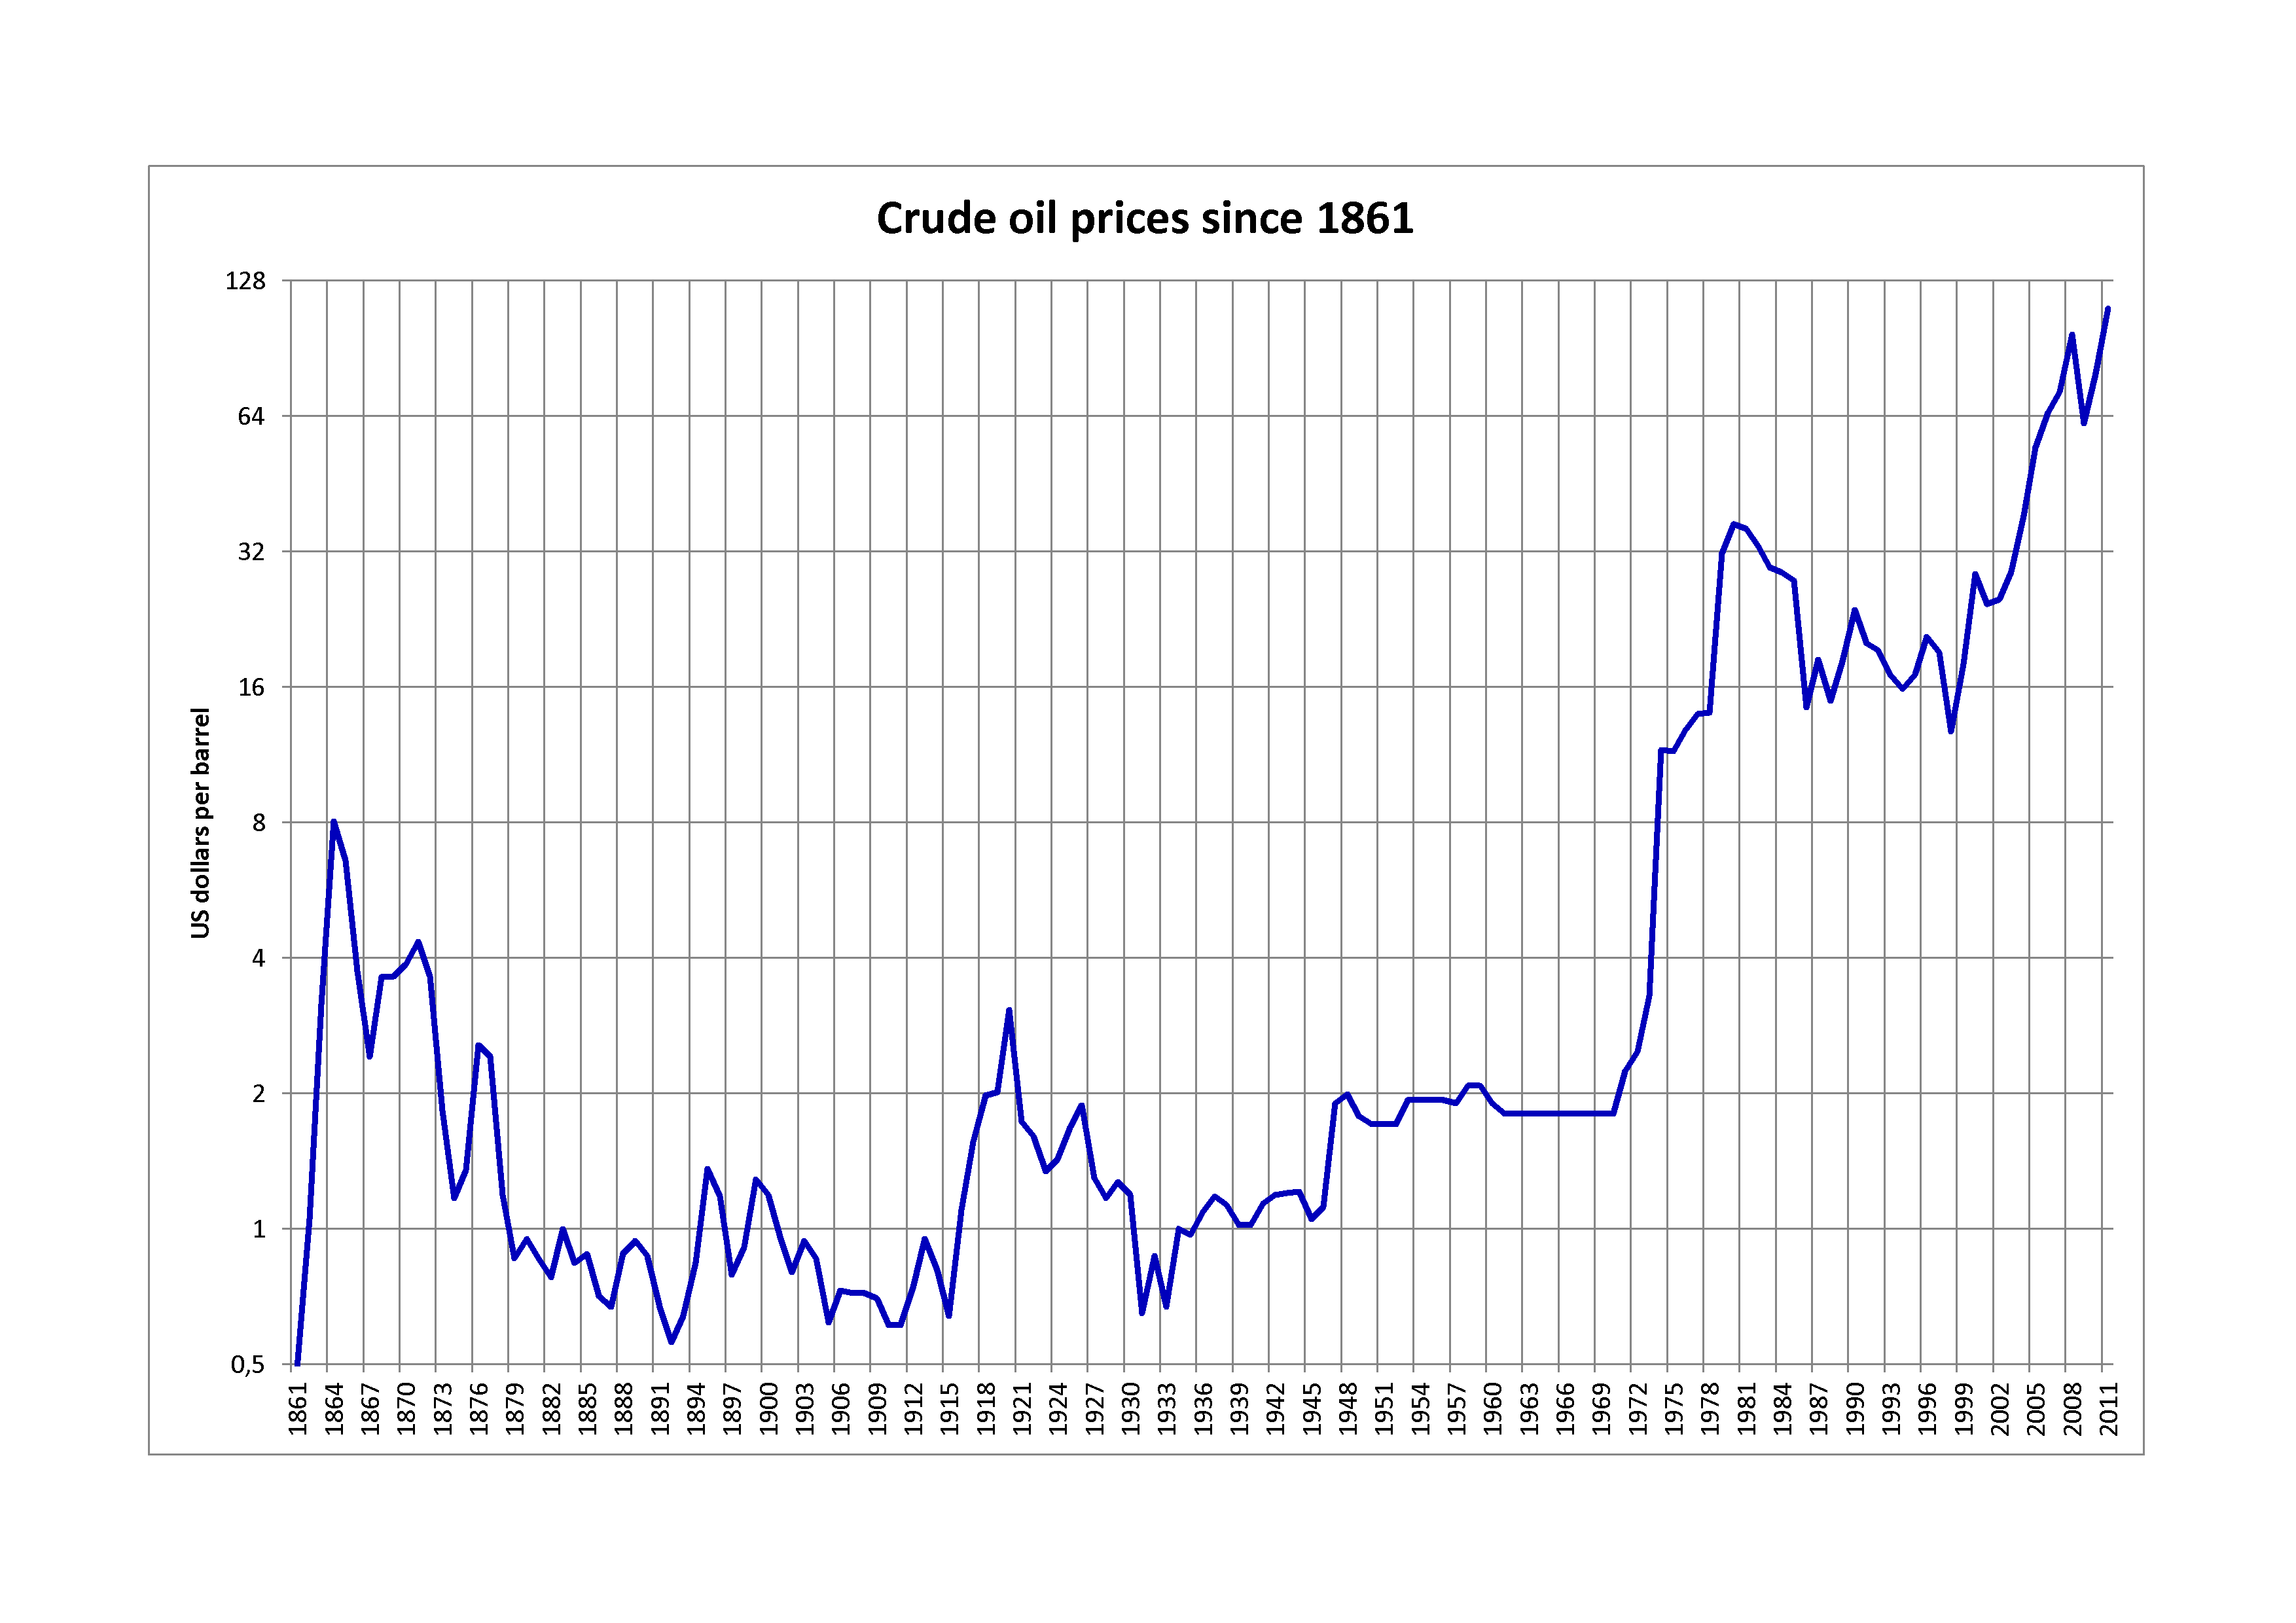 File:Crude oil prices since 1861 (log).png - Wikimedia Commons